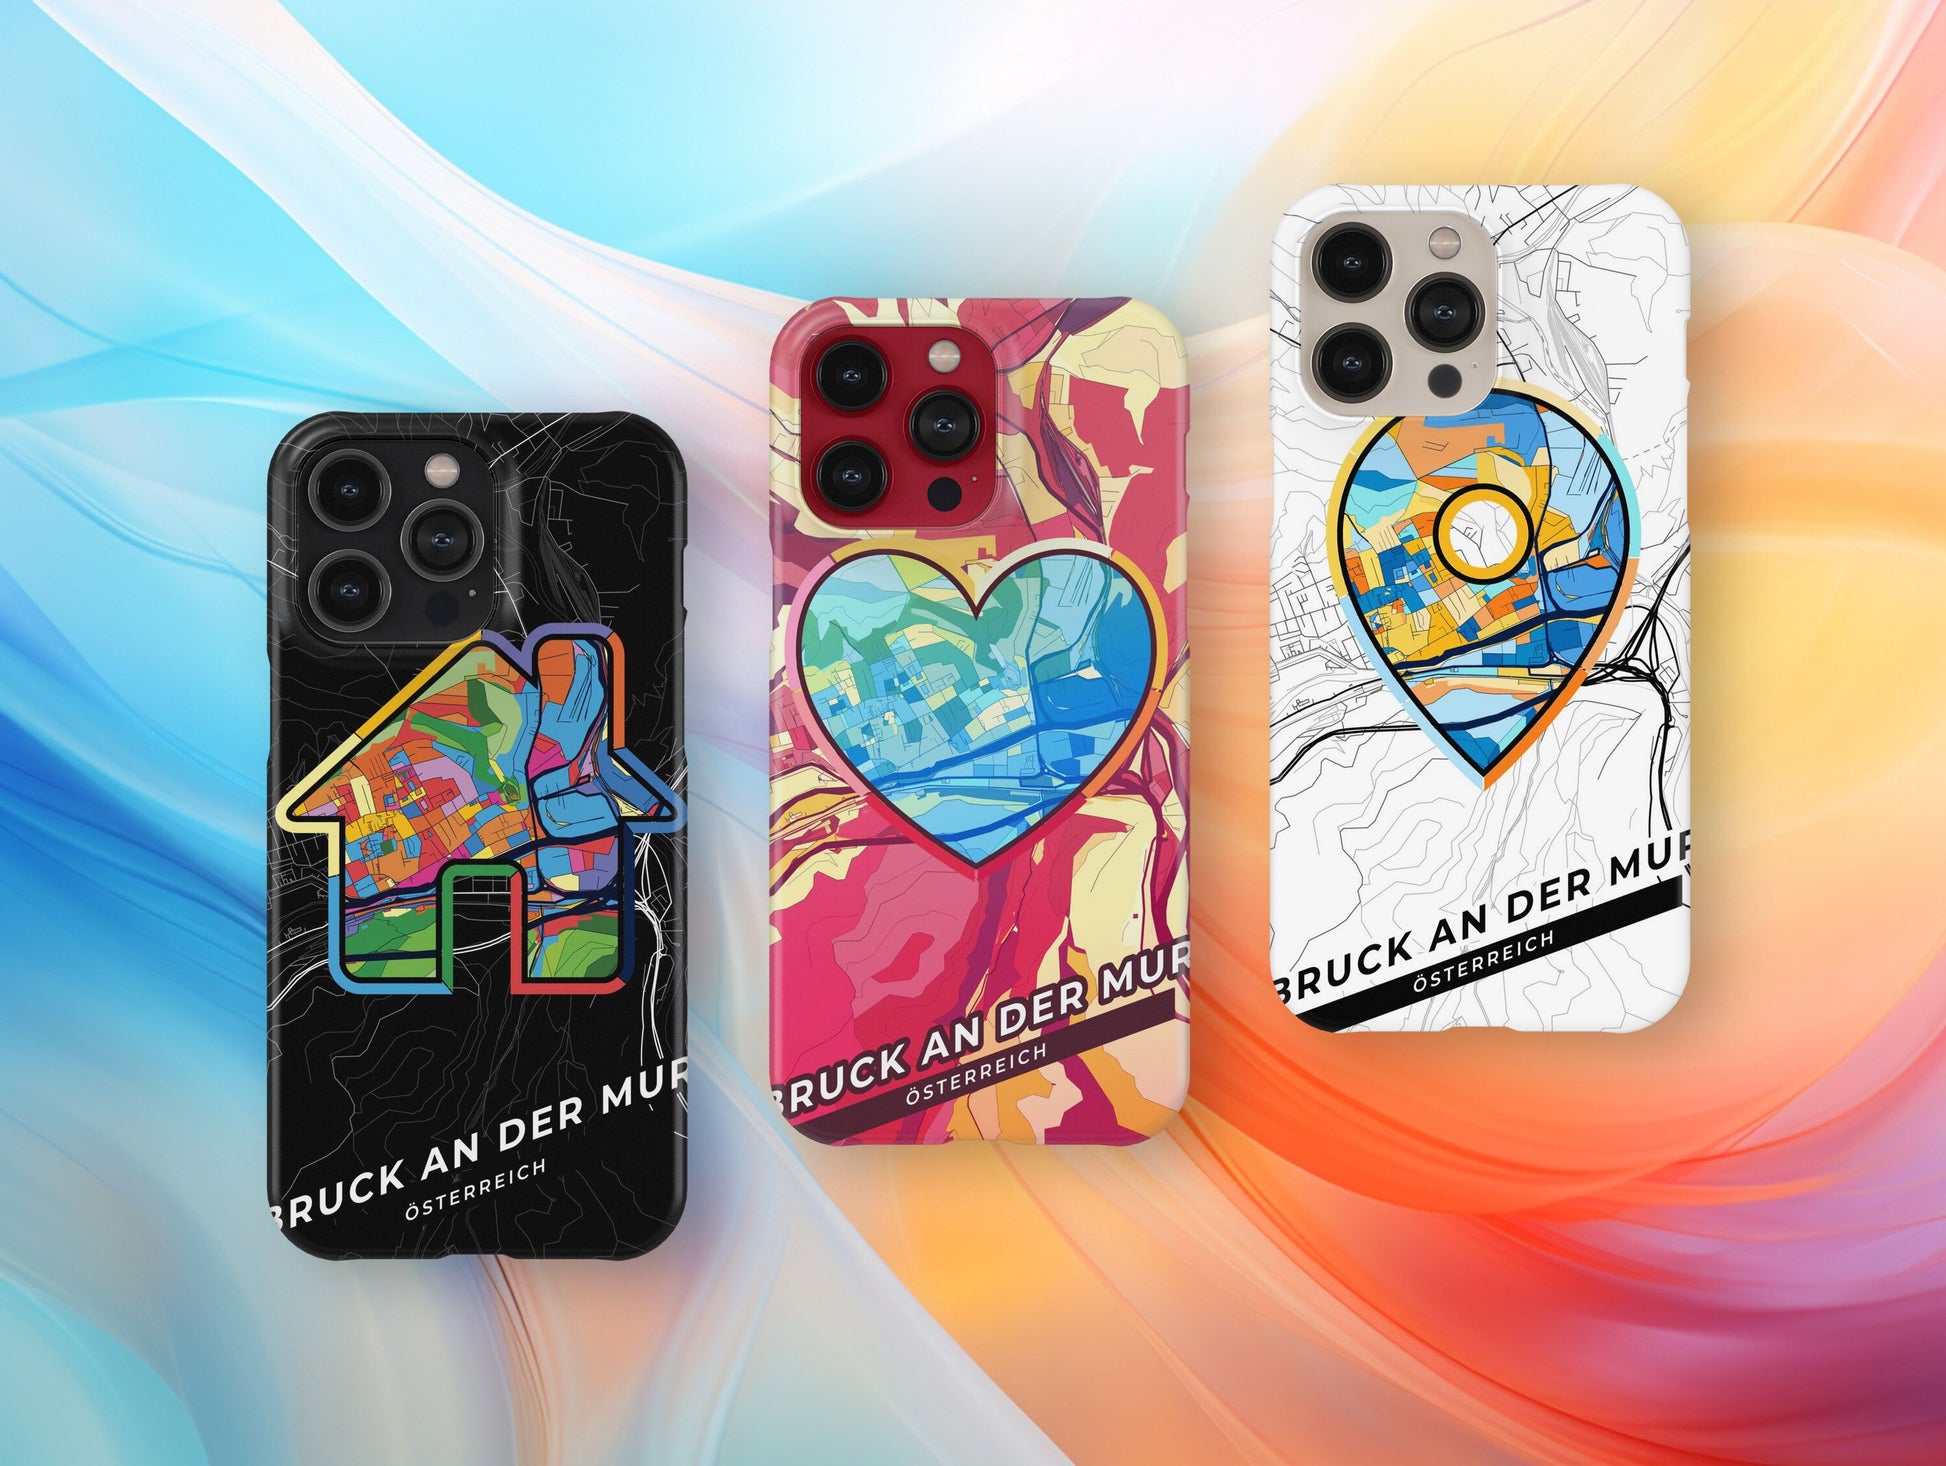 Bruck An Der Mur Österreich slim phone case with colorful icon. Birthday, wedding or housewarming gift. Couple match cases.